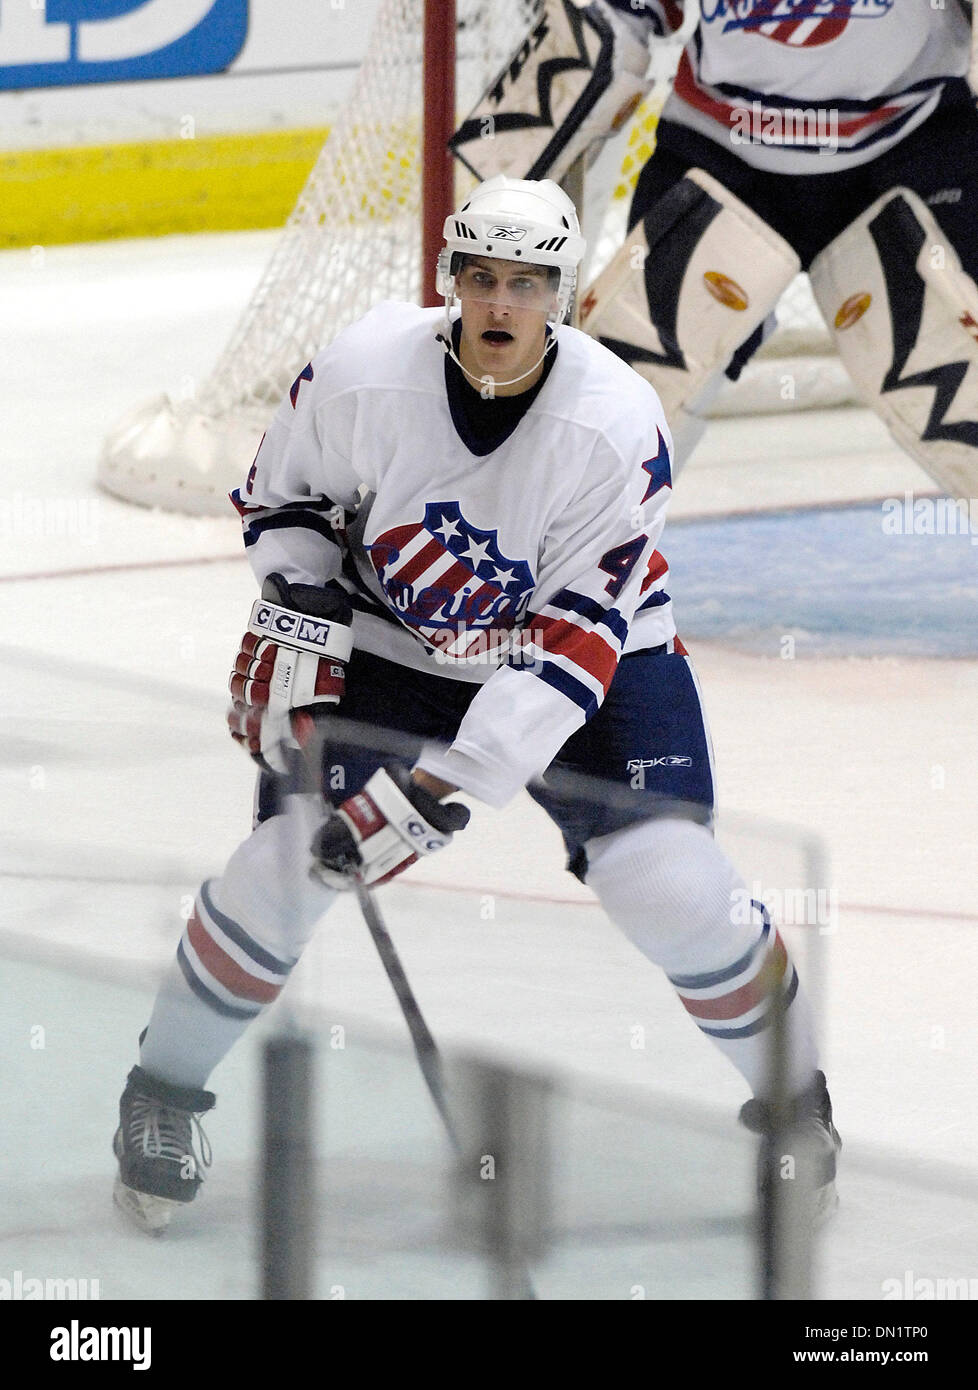 October 13, 2006: AHL - Rochester defender Michael Funk (4) in action against Binghamton - Binghamton Senators at Rochester Americans at The Blue Cross Arena in Rochester, New York. Rochester defeated Binghamton in a shootout.(Credit Image: © Alan Schwartz/Cal Sport Media) Stock Photo